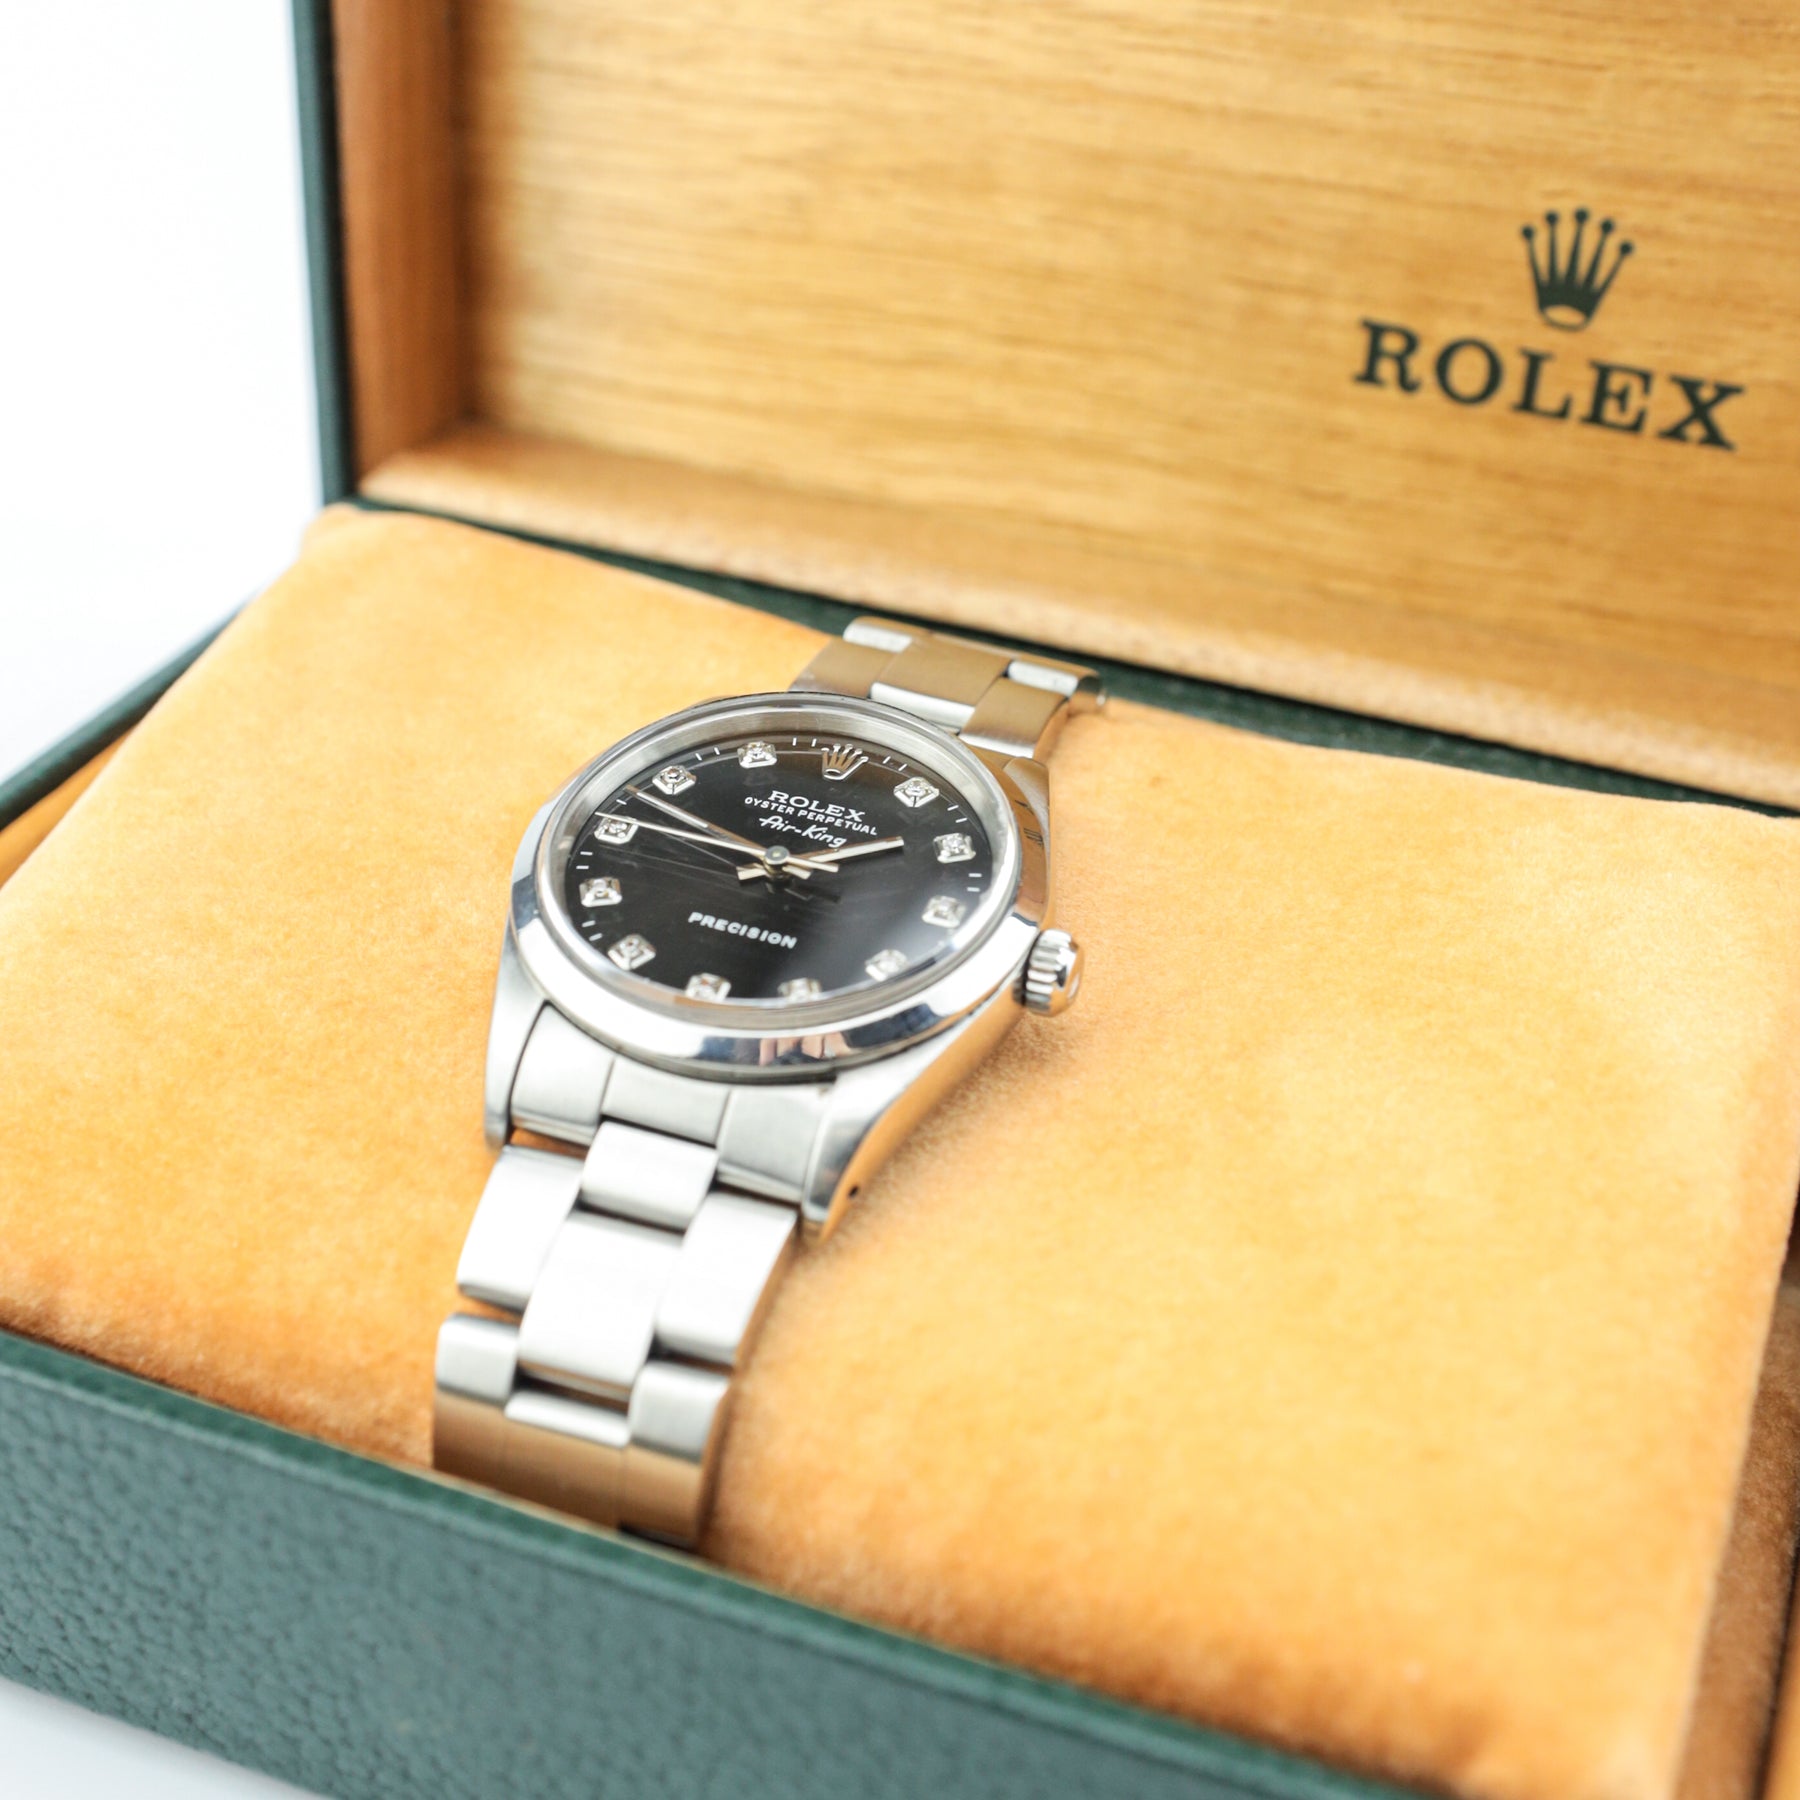 Worn Pre - Owned Good Condition Rolex Air - King OYSTER PERPETUAL With Original Box  at RR Jewellers Yarm UK